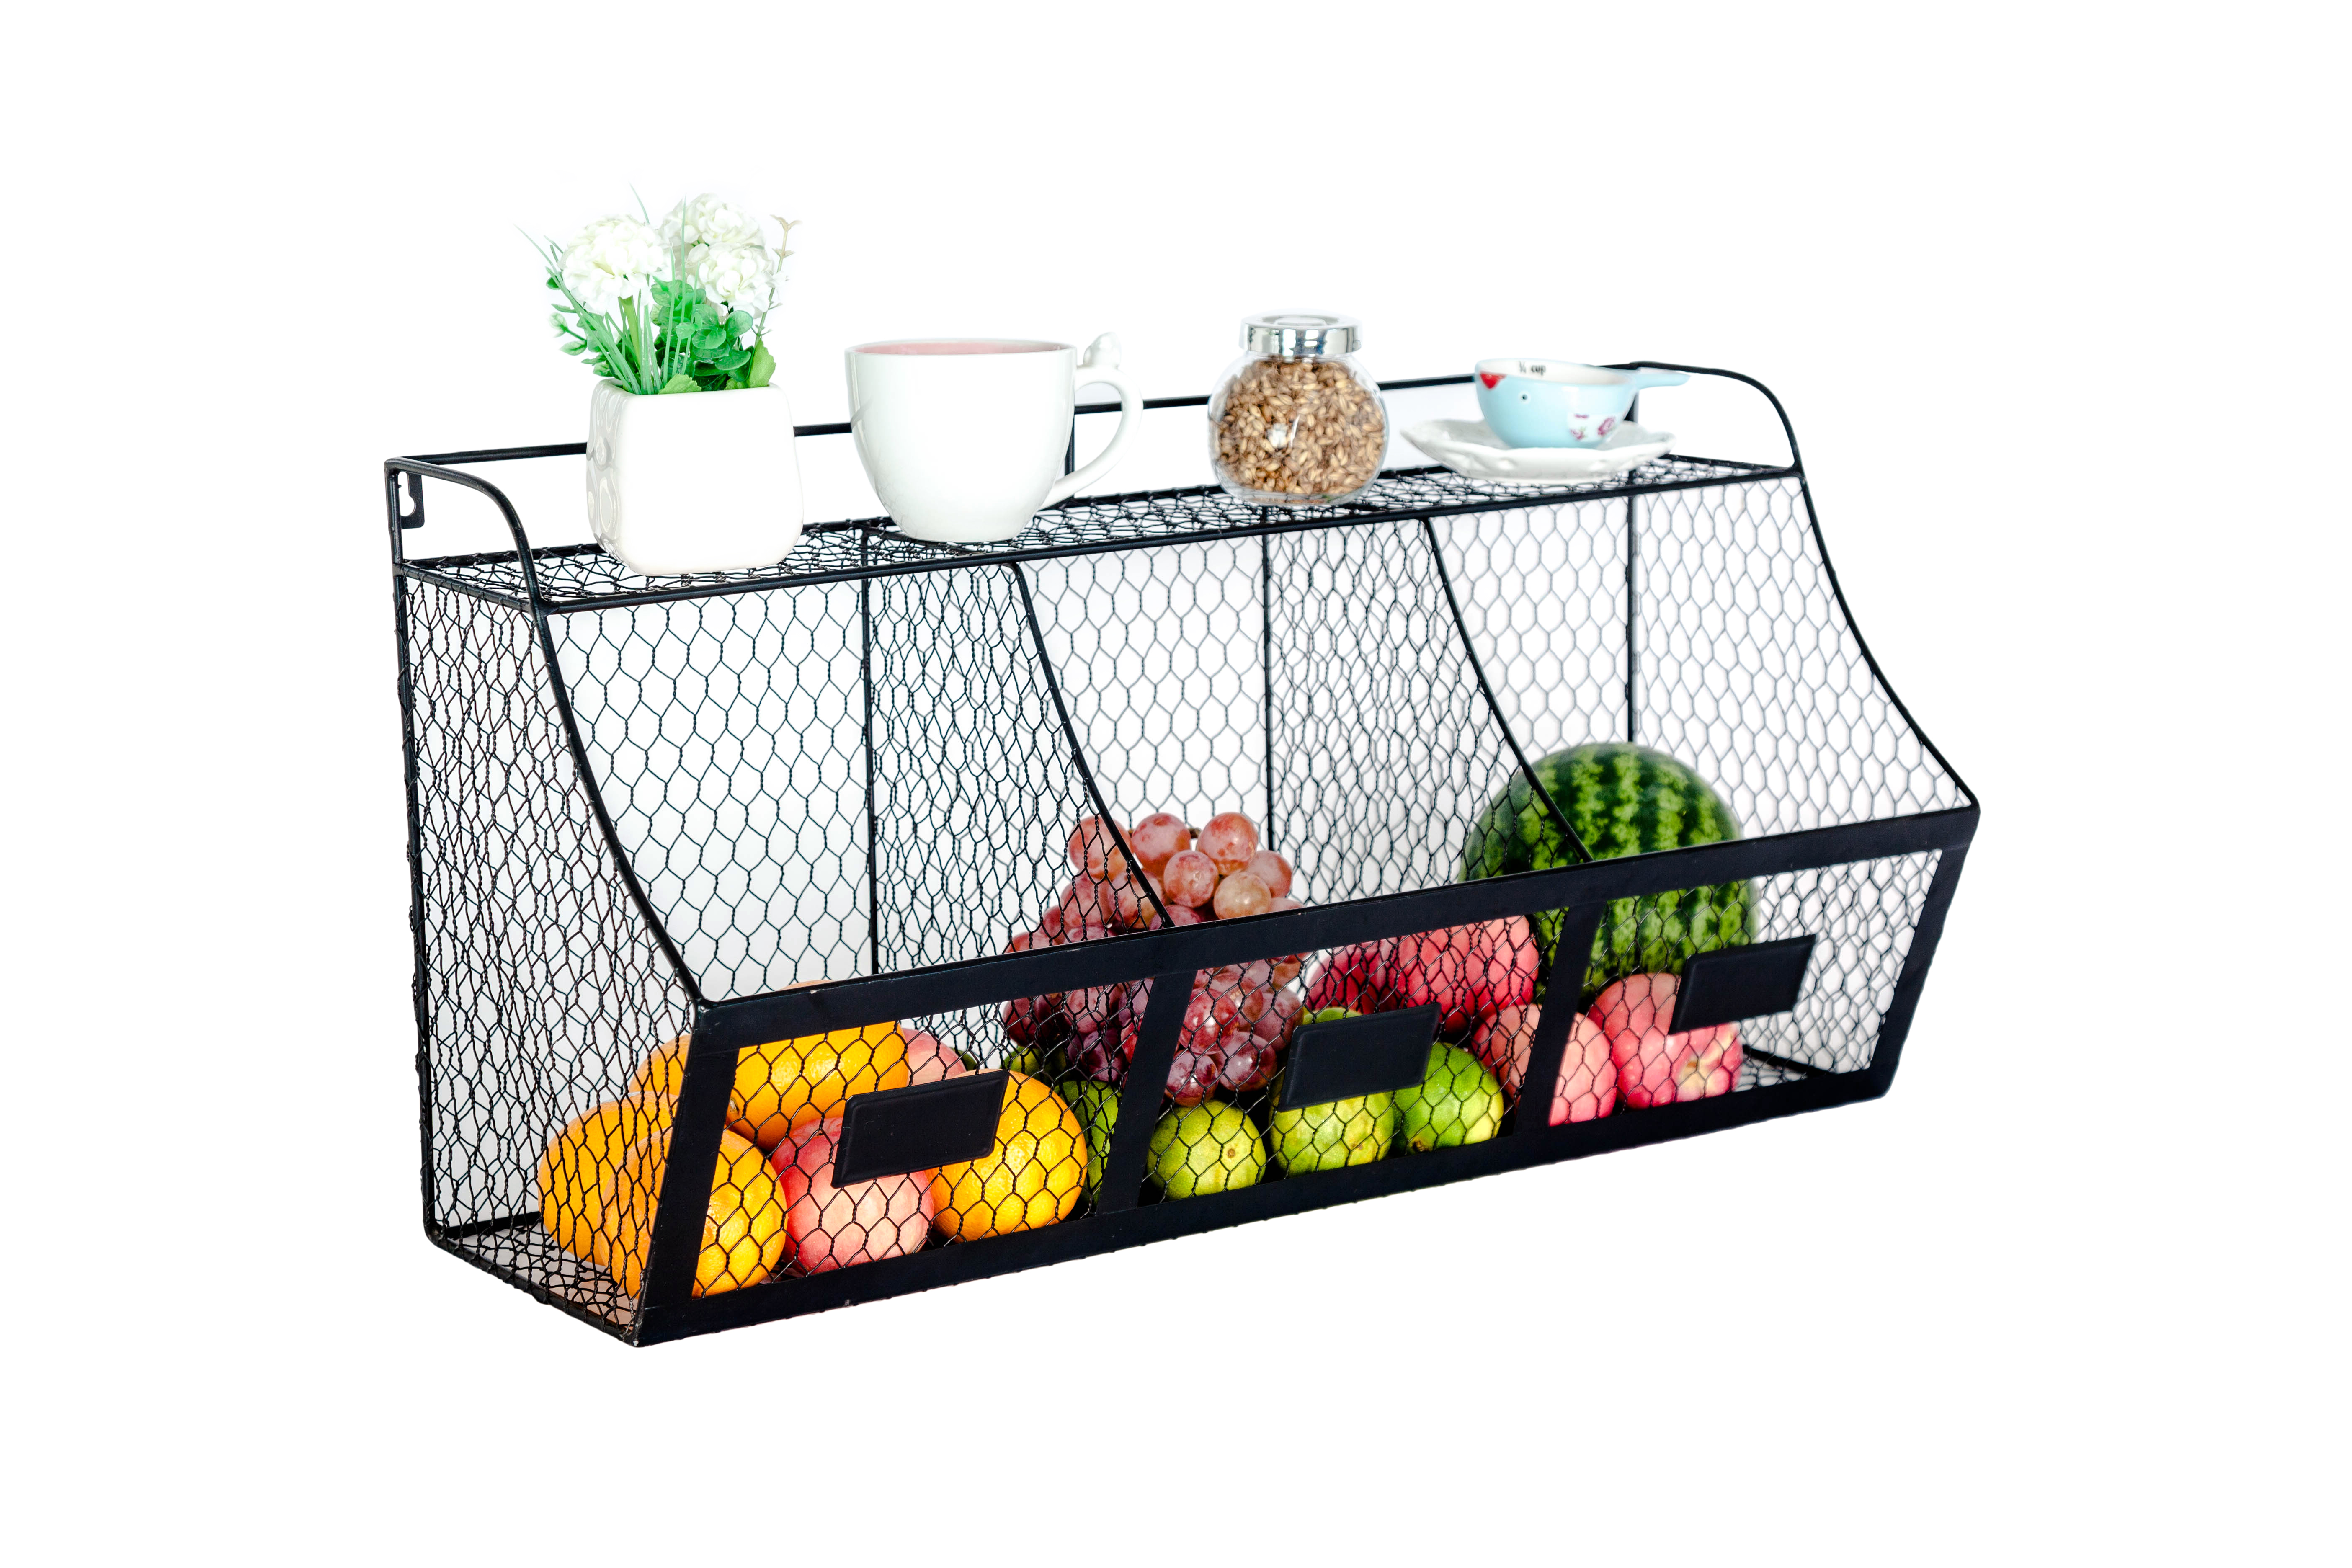 K-Cliffs 3 Compartment Basket, Large Wall Mount Metal Storage Hanging Fruit Organizer  Wire Baskets  Black Dimensions; 26x13x10 - image 2 of 5